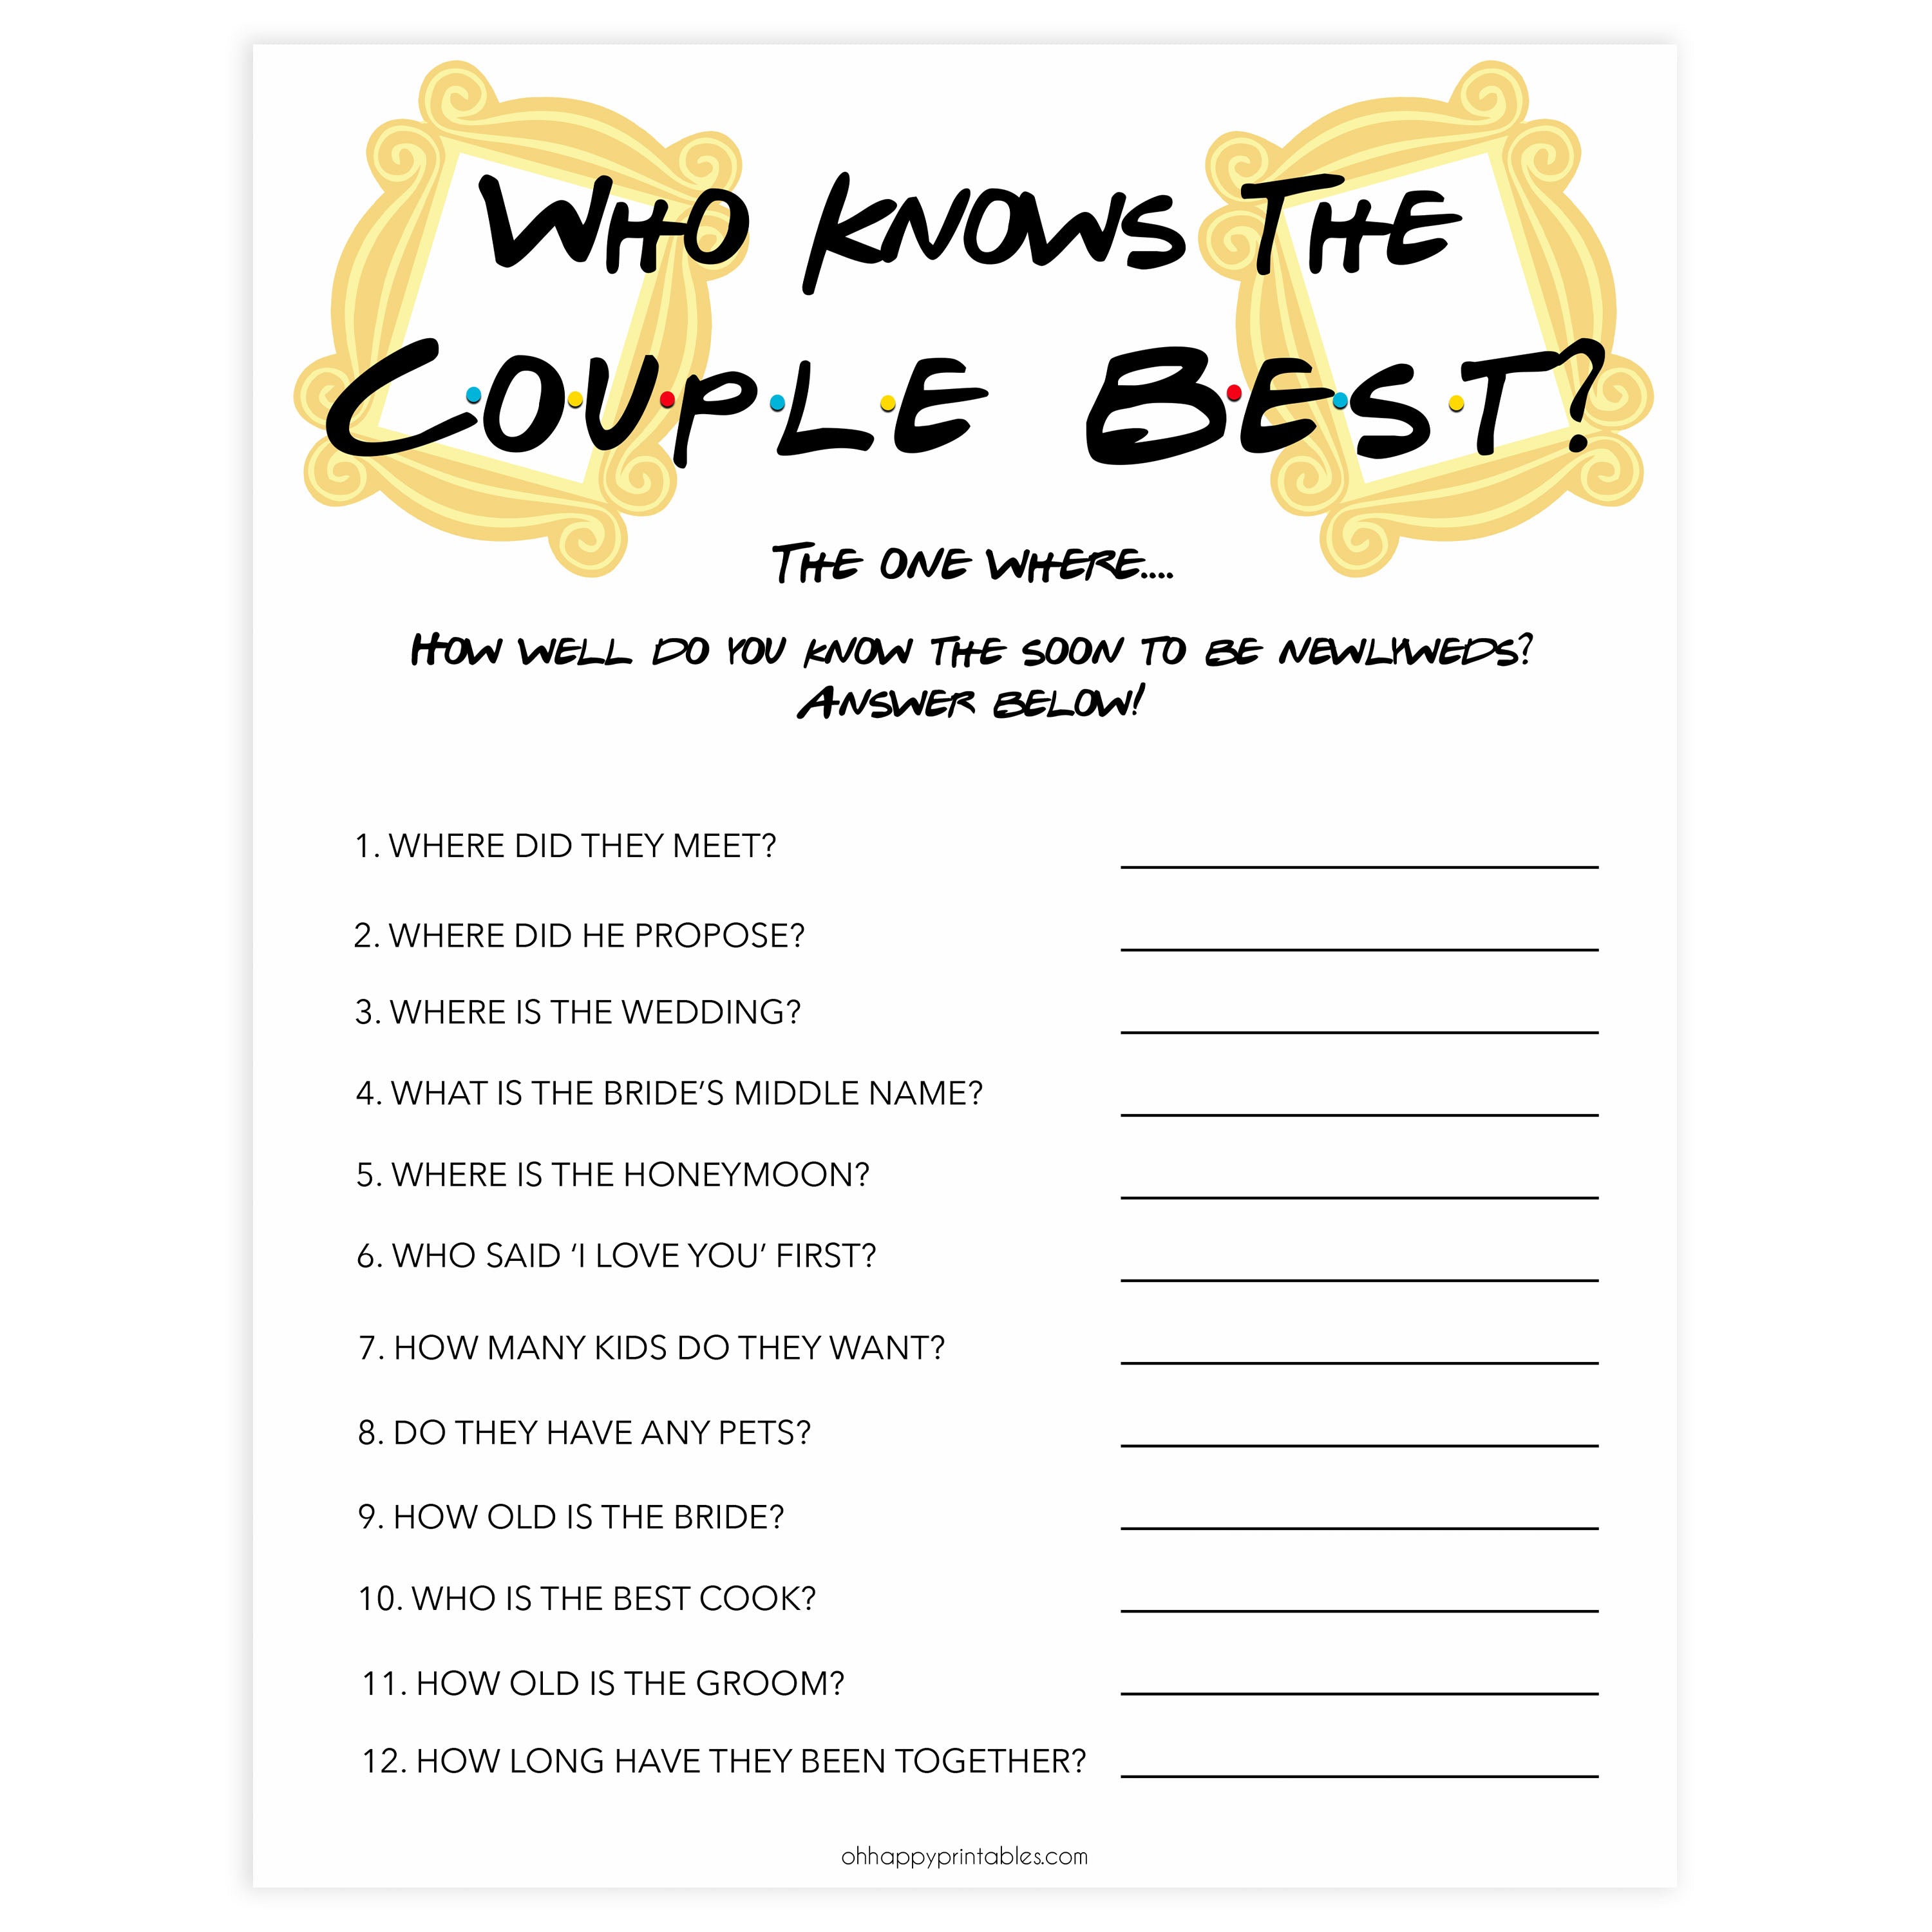 Editable who knows the couple best, Printable bridal shower games, friends bridal shower, friends bridal shower games, fun bridal shower games, bridal shower game ideas, friends bridal shower